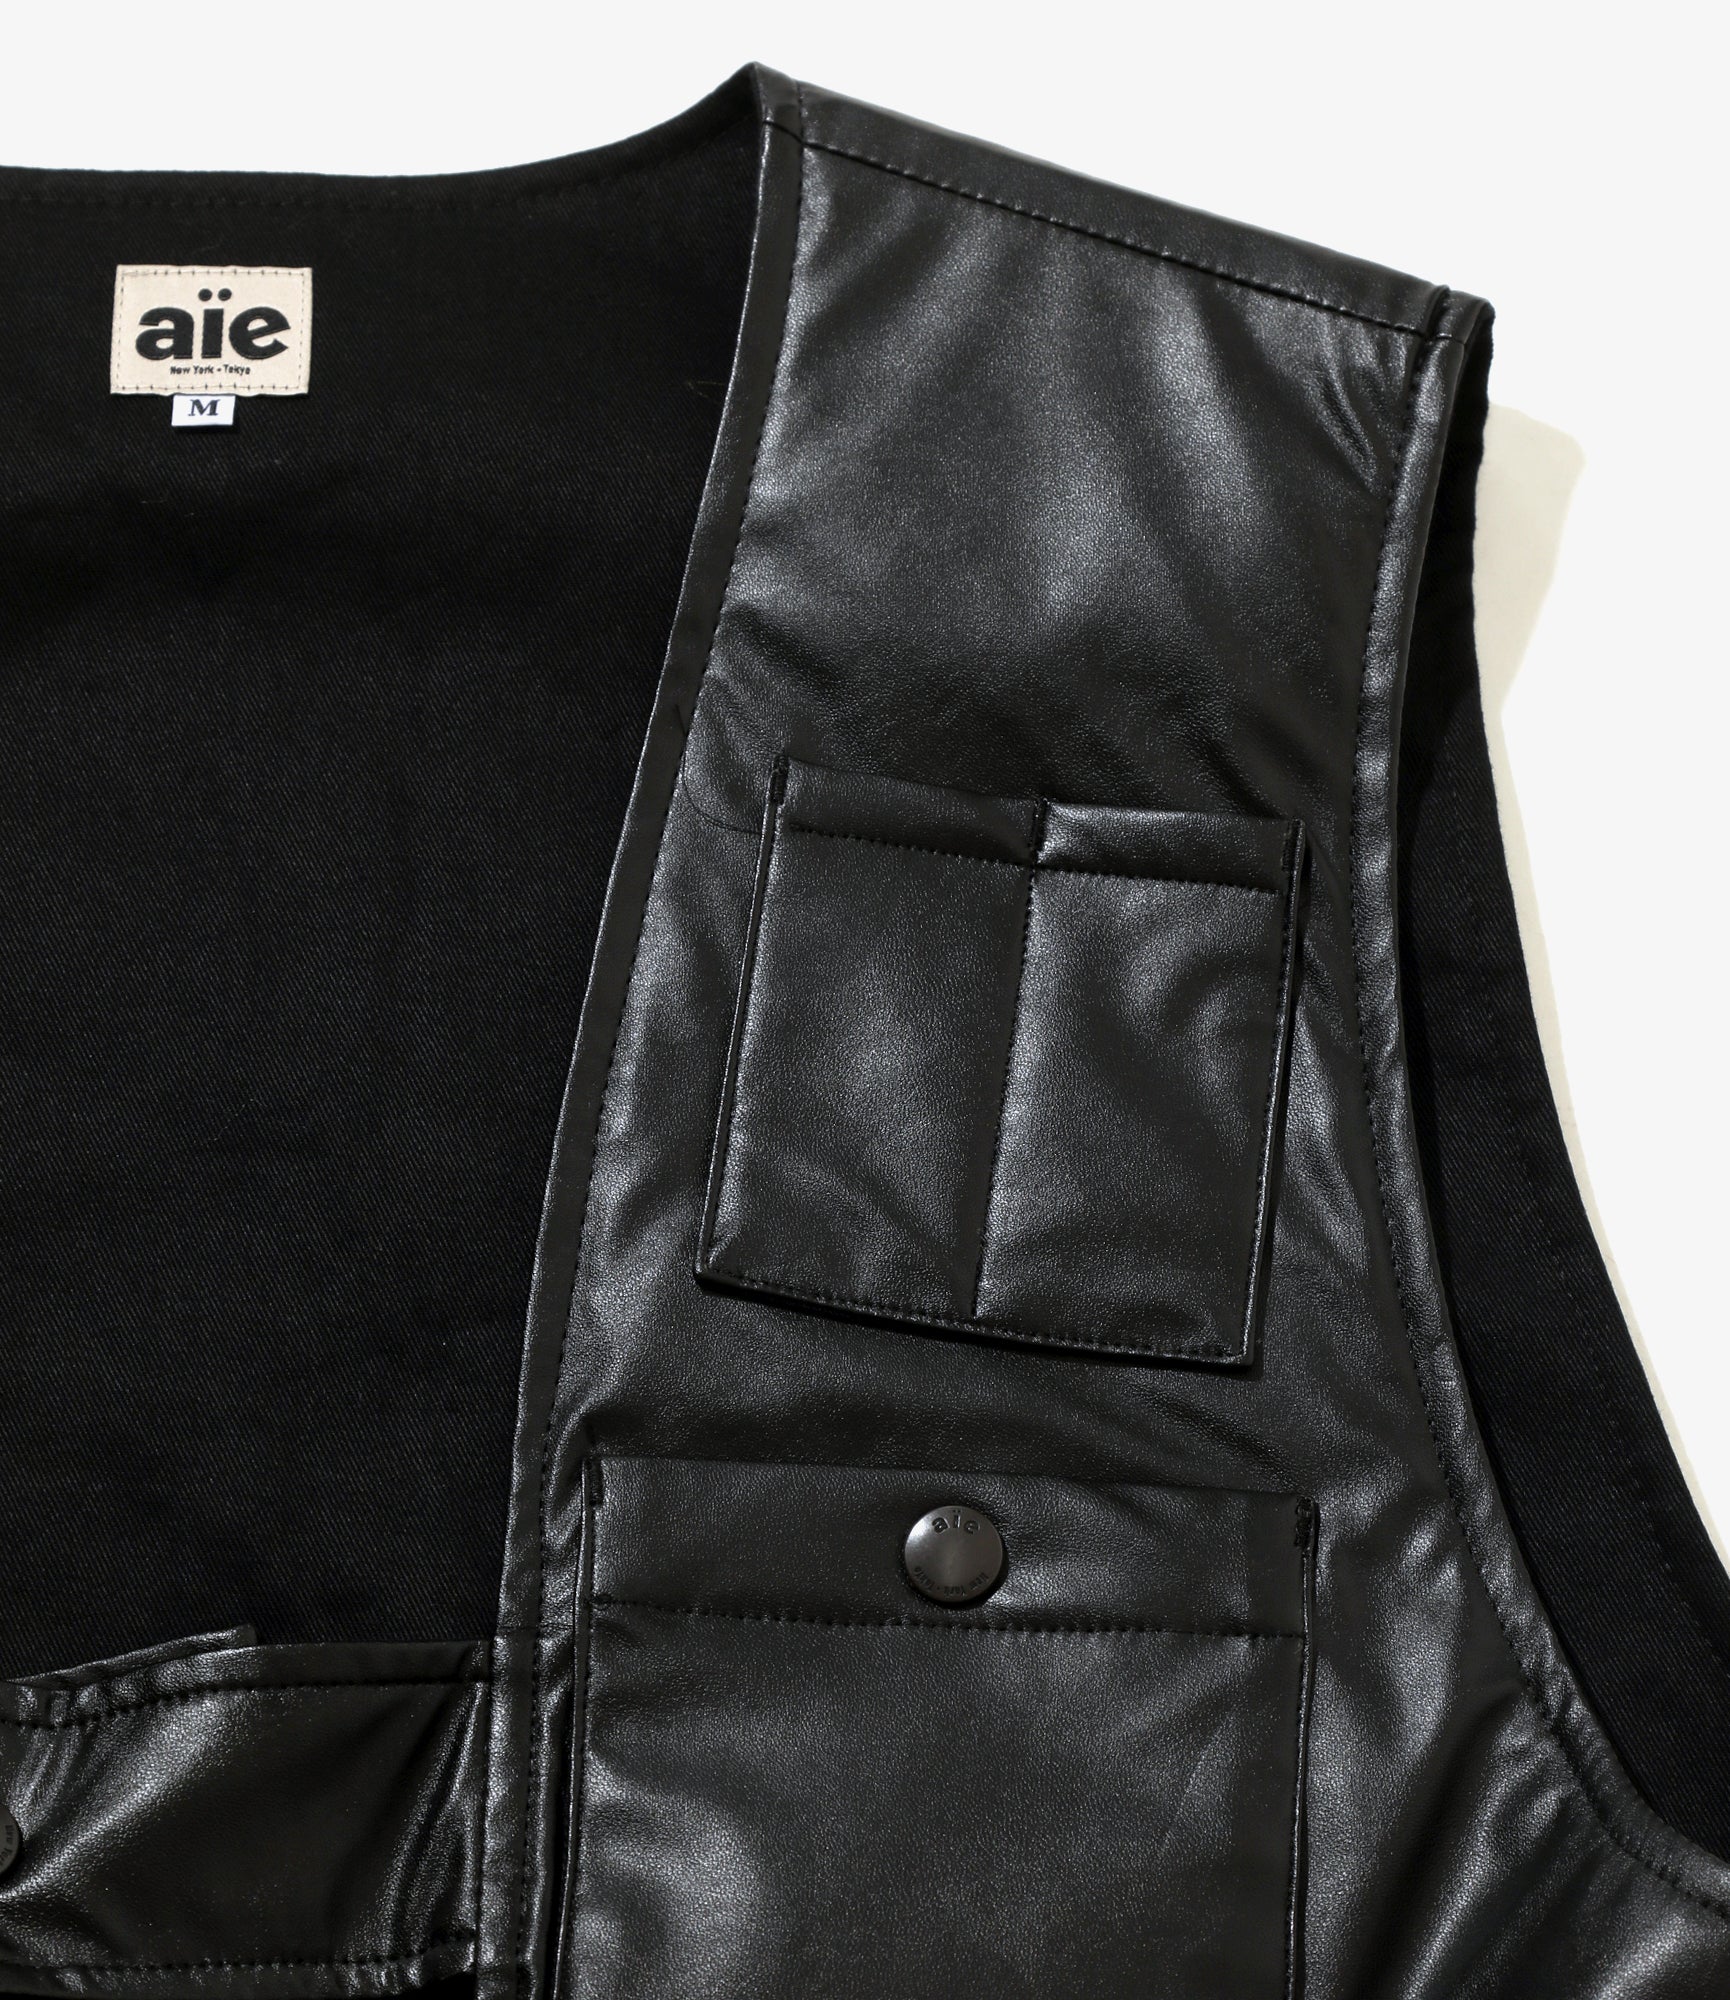 Game Vest - Black - Synthetic Leather